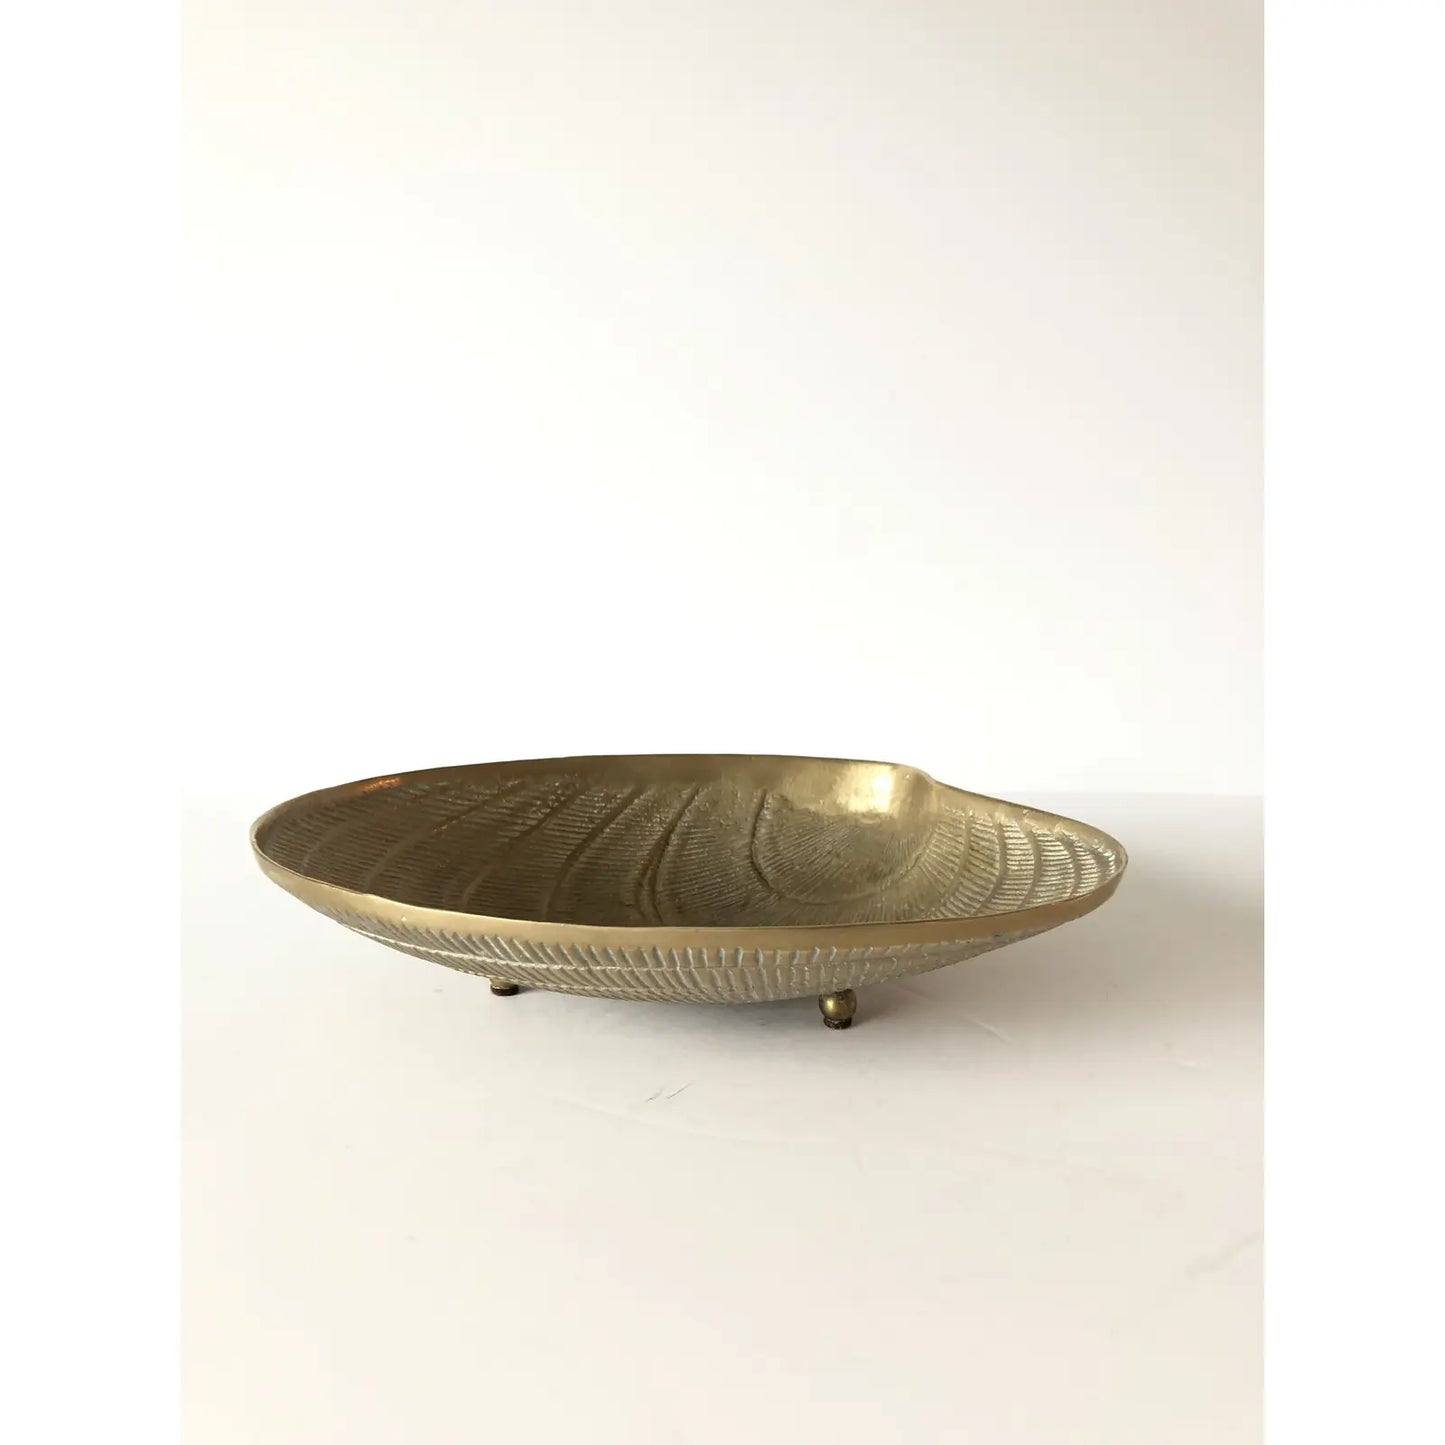 Large vintage 1970s Solid Brass Clam Shell Bowl Display Dish With Feet